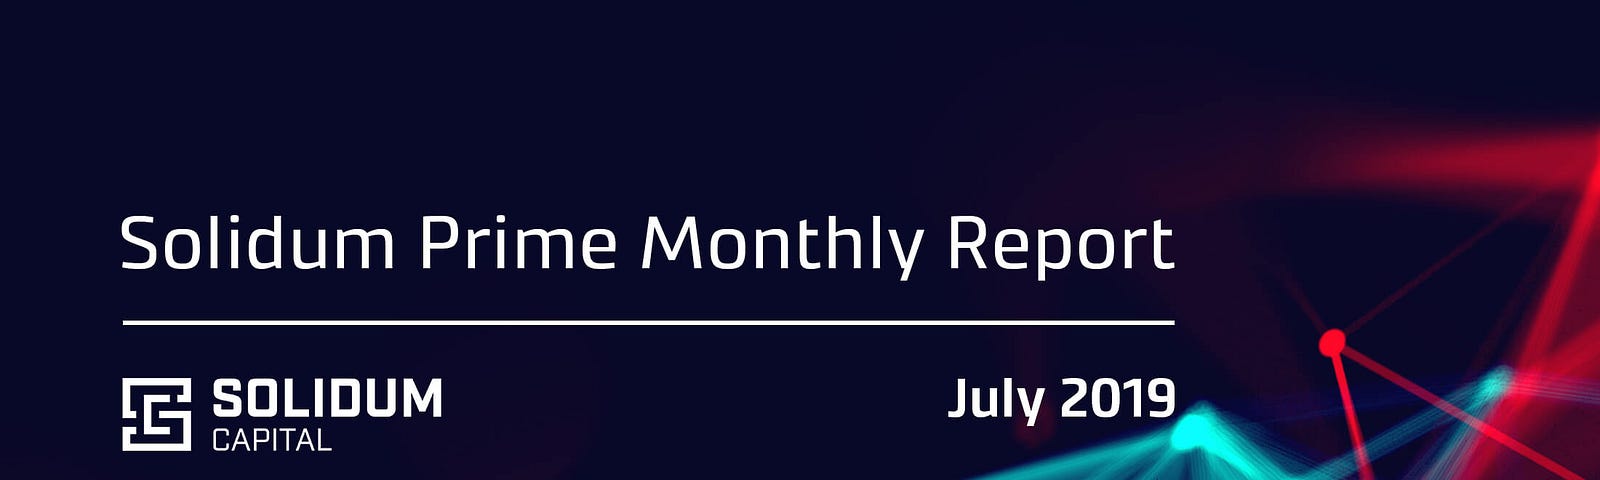 Solidum Prime (SOPR) Monthly Report for July 2019